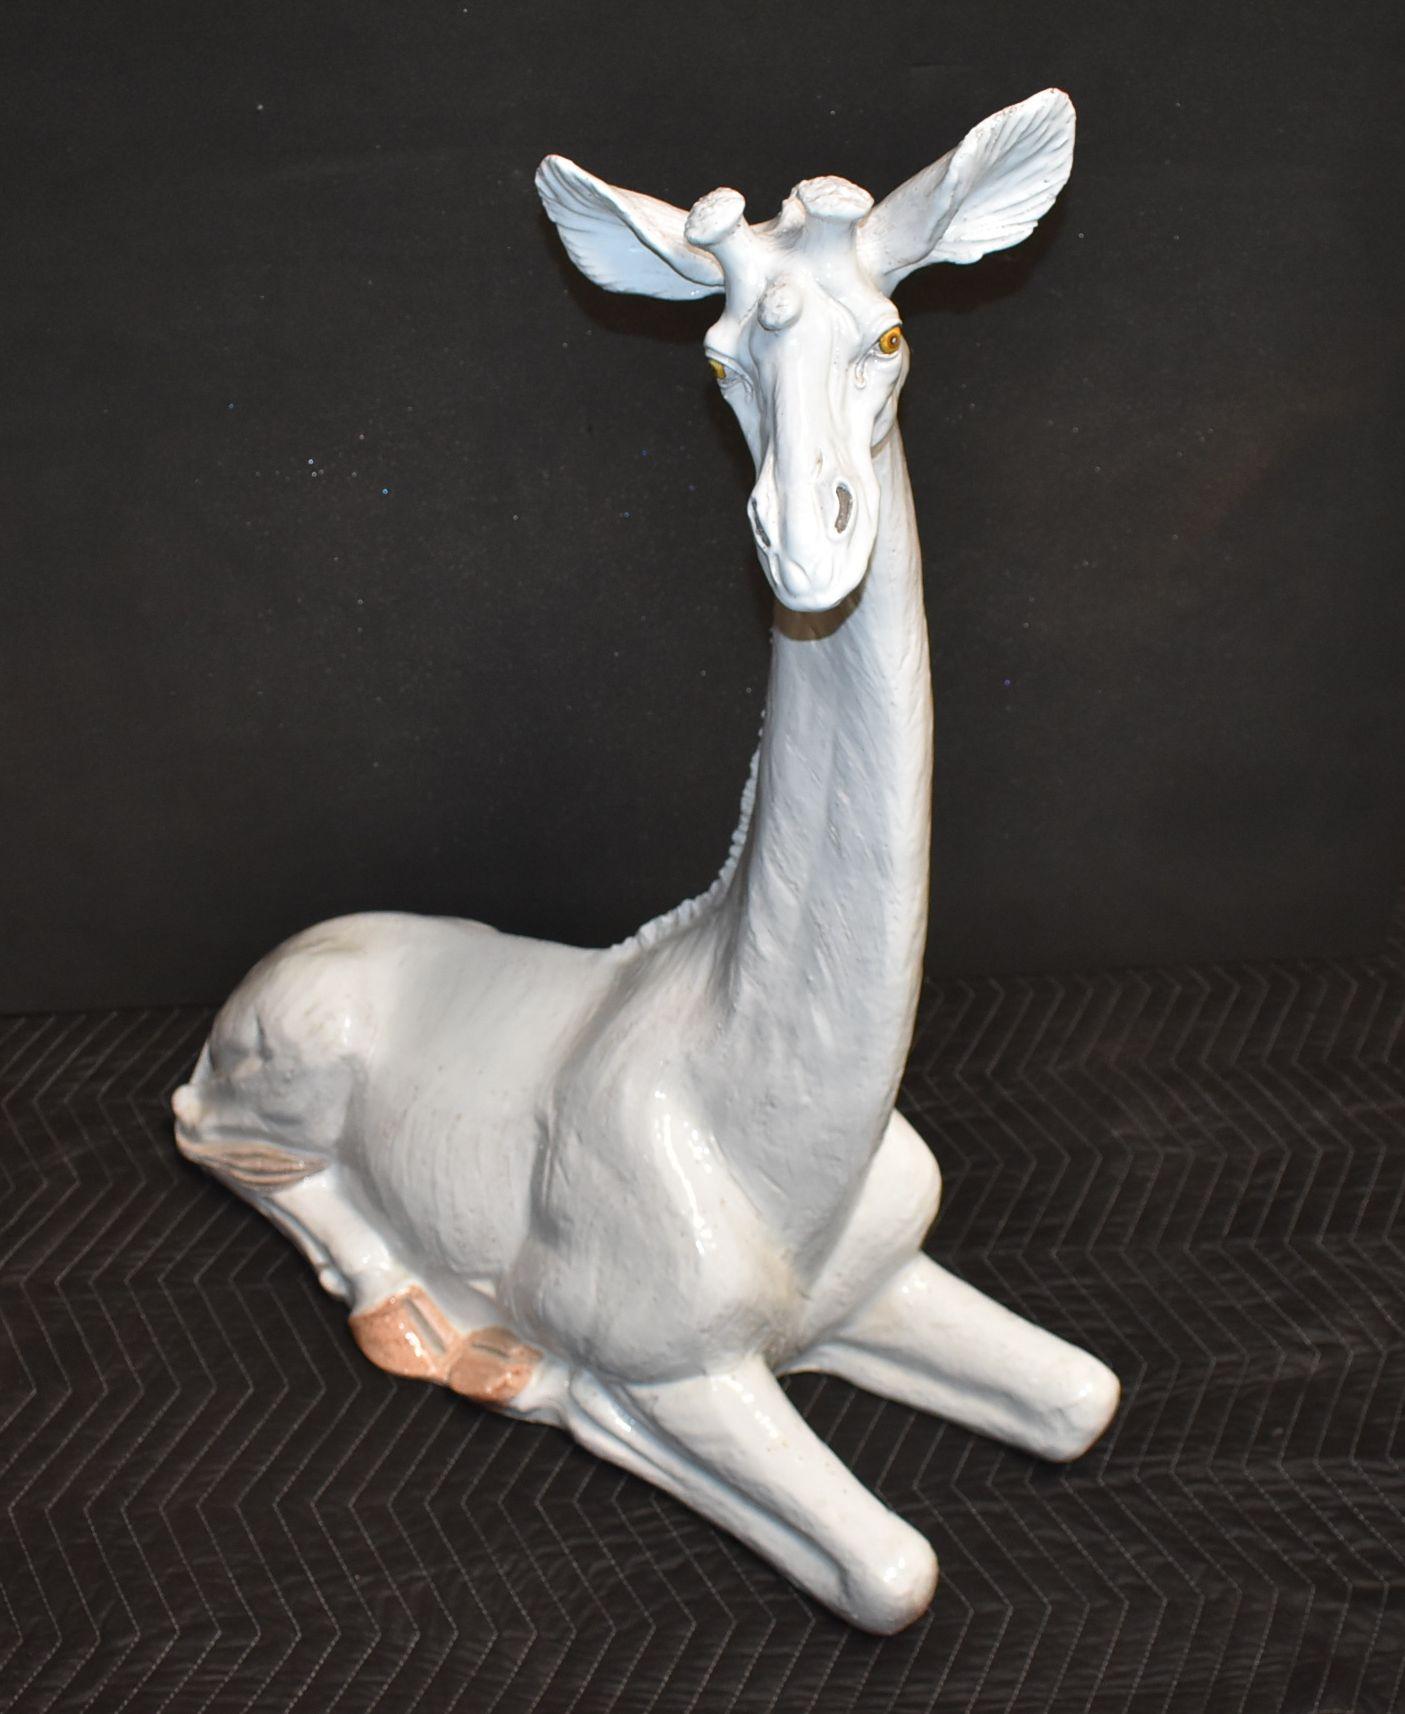 Italian white ceramic glazed on terracotta with hand painted details giraffe sculpture. Marked Italy, circa 1970s.

 